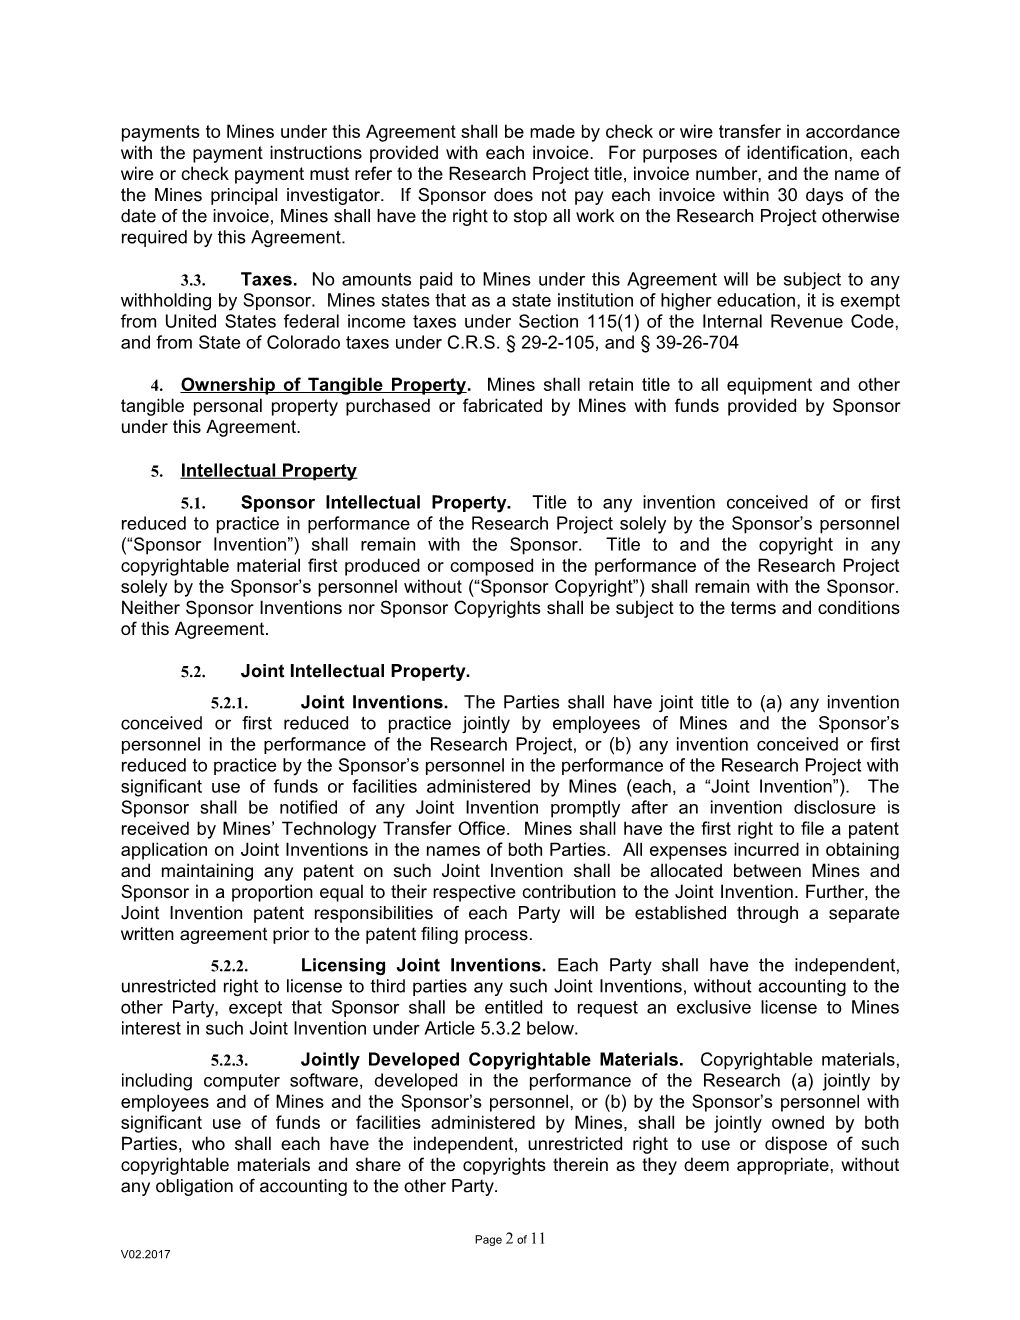 Colorado School of Mines Research Agreement